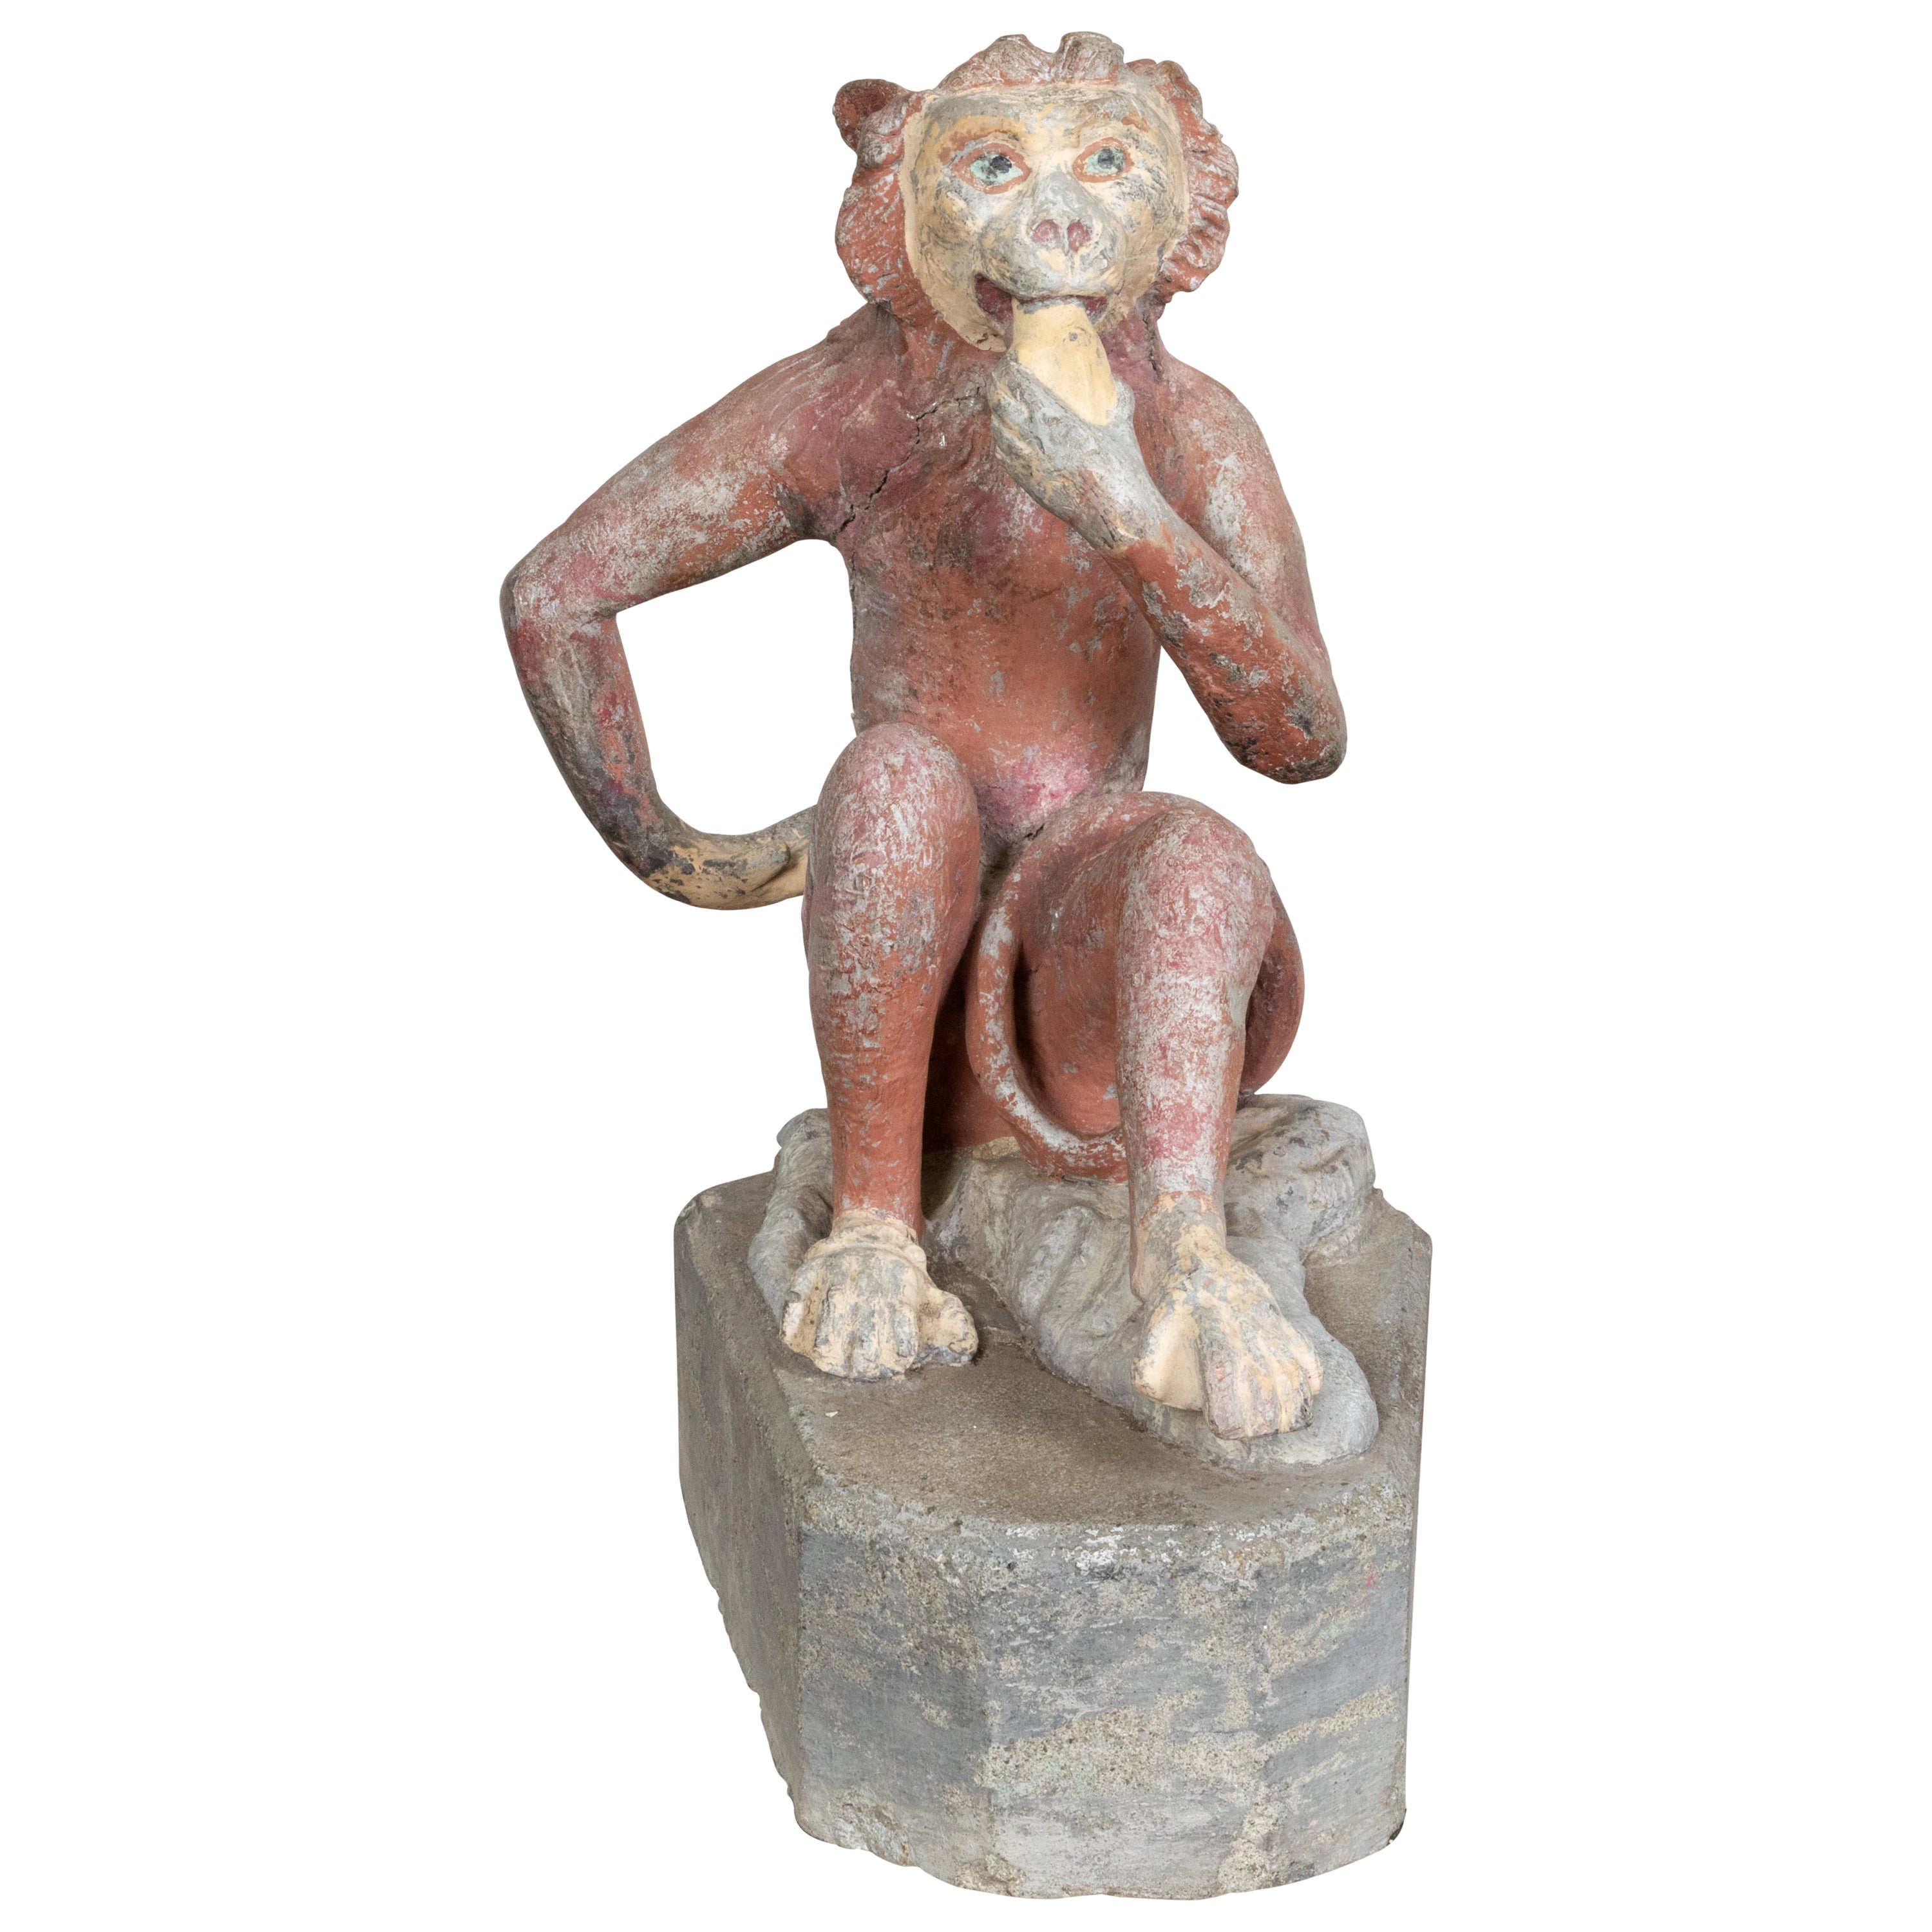 French Midcentury Lead Sculpture of a Monkey Eating a Banana with Aged Patina For Sale